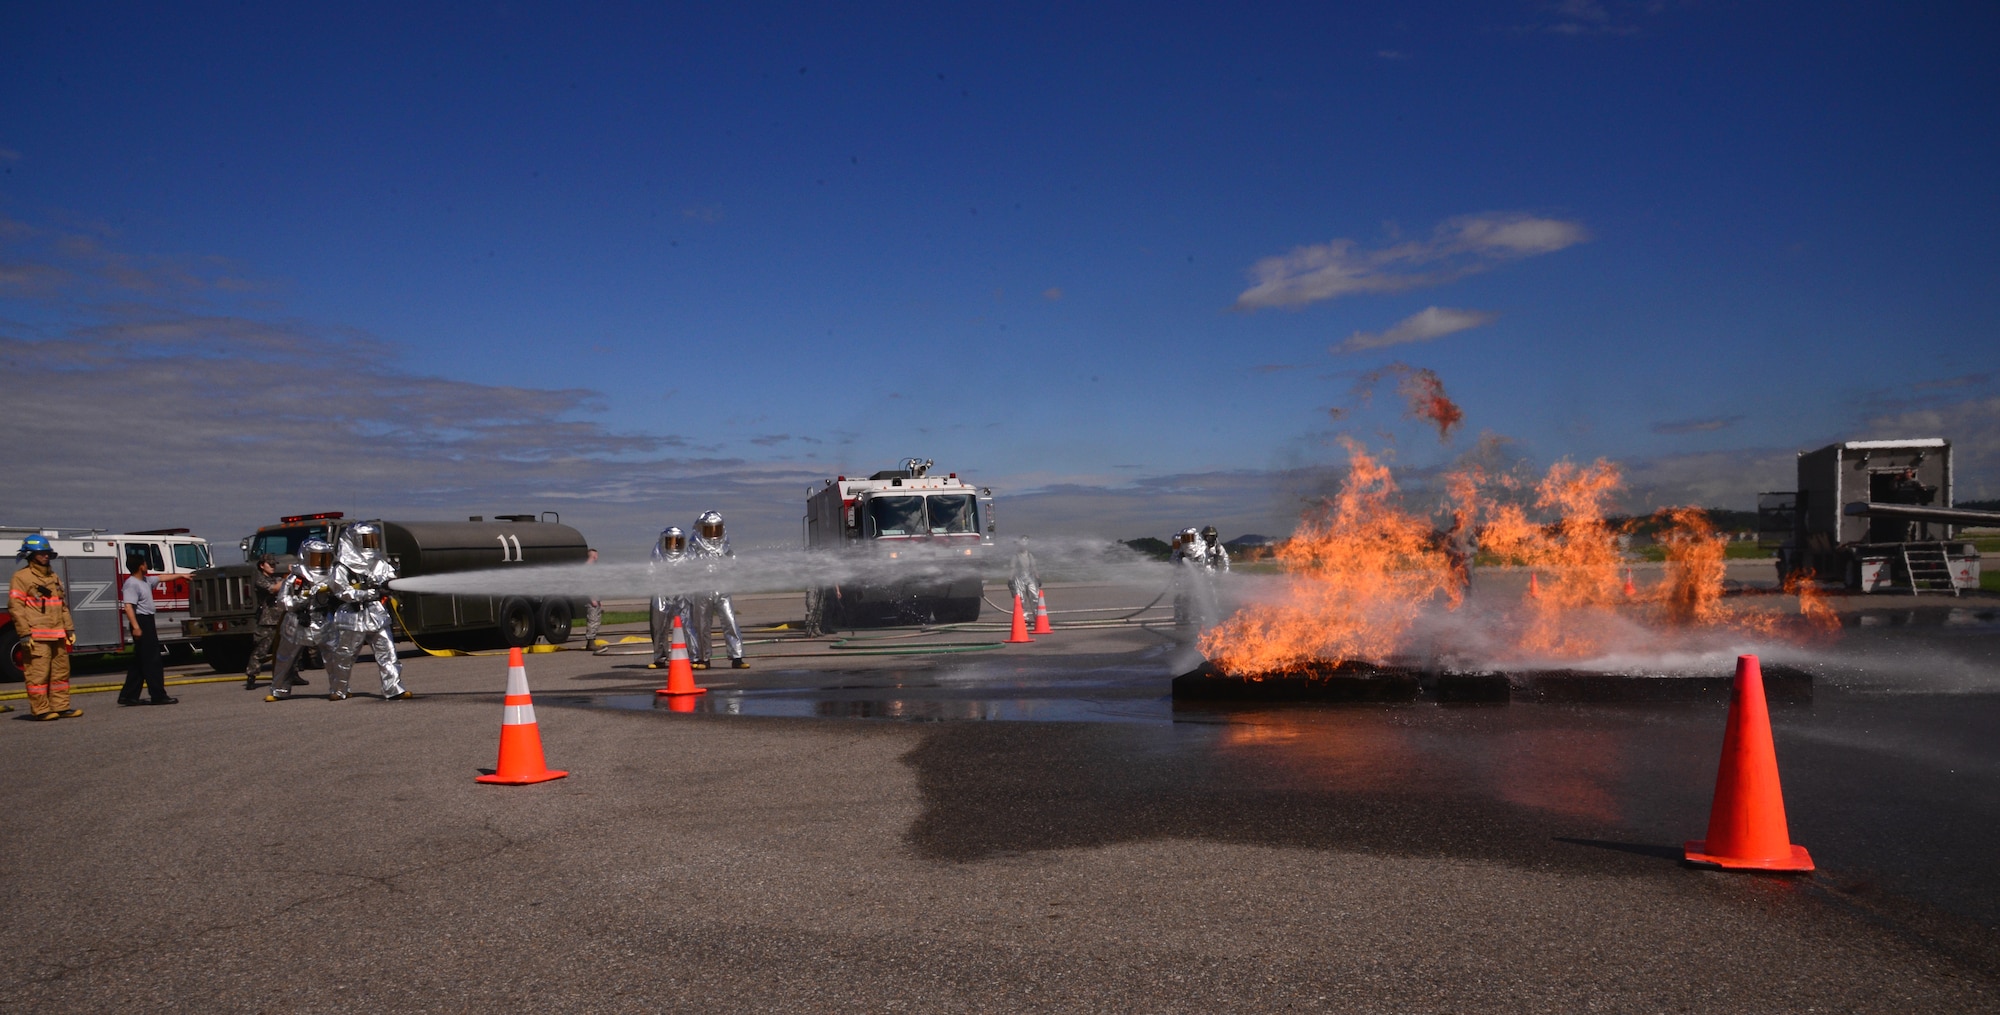 Firefighters from the 51st Civil Engineer Squadron assist Republic of Korea air force firefighters and members of the Songtan fire station practice their fire-sweeping techniques on a simulated fuel fire during a training exercise Aug 26, 2015, at Osan Air Base, Republic of Korea. During emergencies and humanitarian assistance operations, a strong relationship between first-responders is vital to ensuring safety for the entire community. (U. S. Air Force photo by Staff Sgt. Benjamin Sutton) 